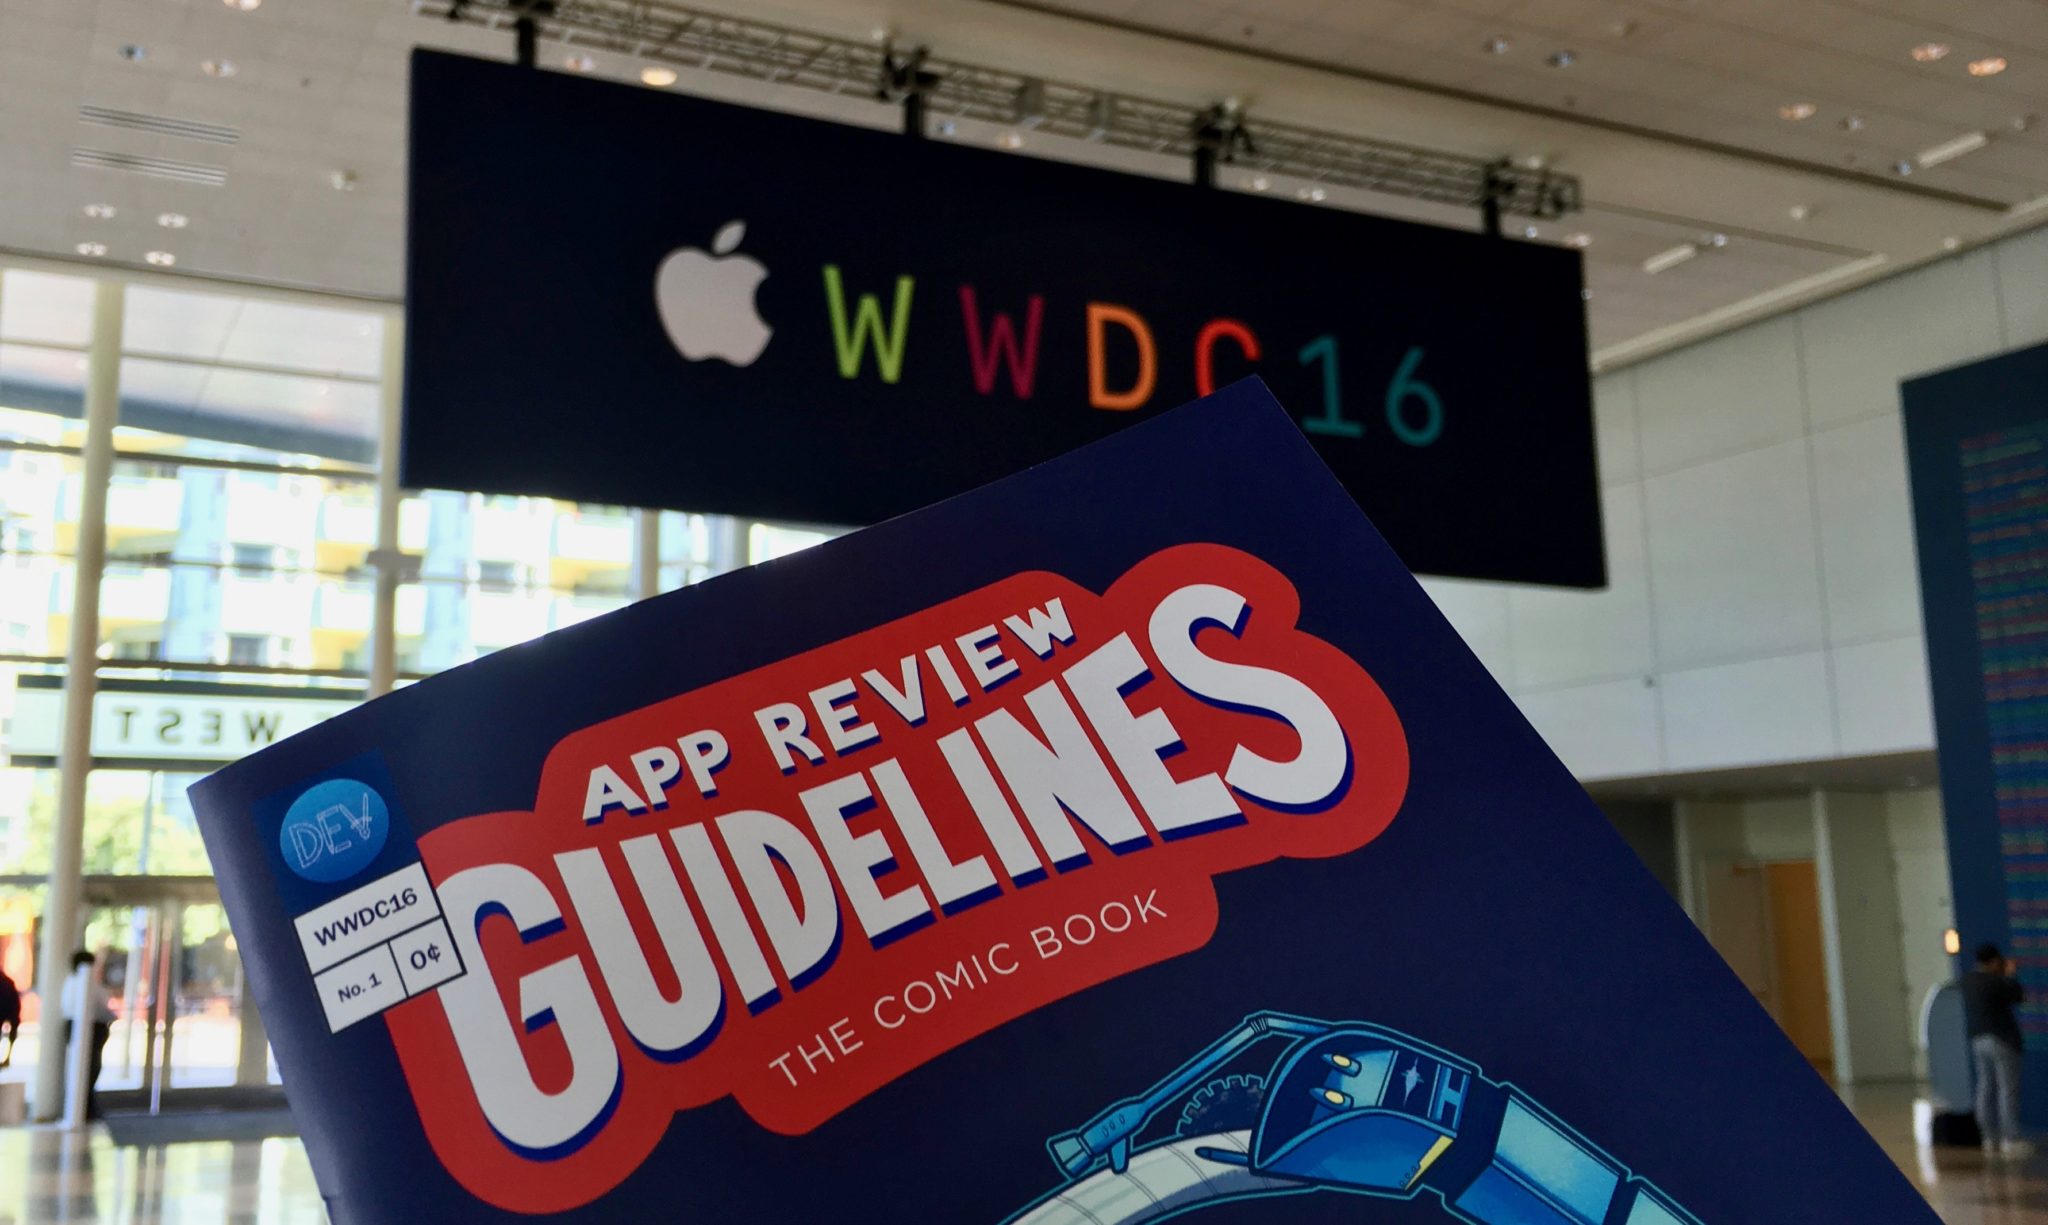 App Review Guidelines Comic WWDC 2016